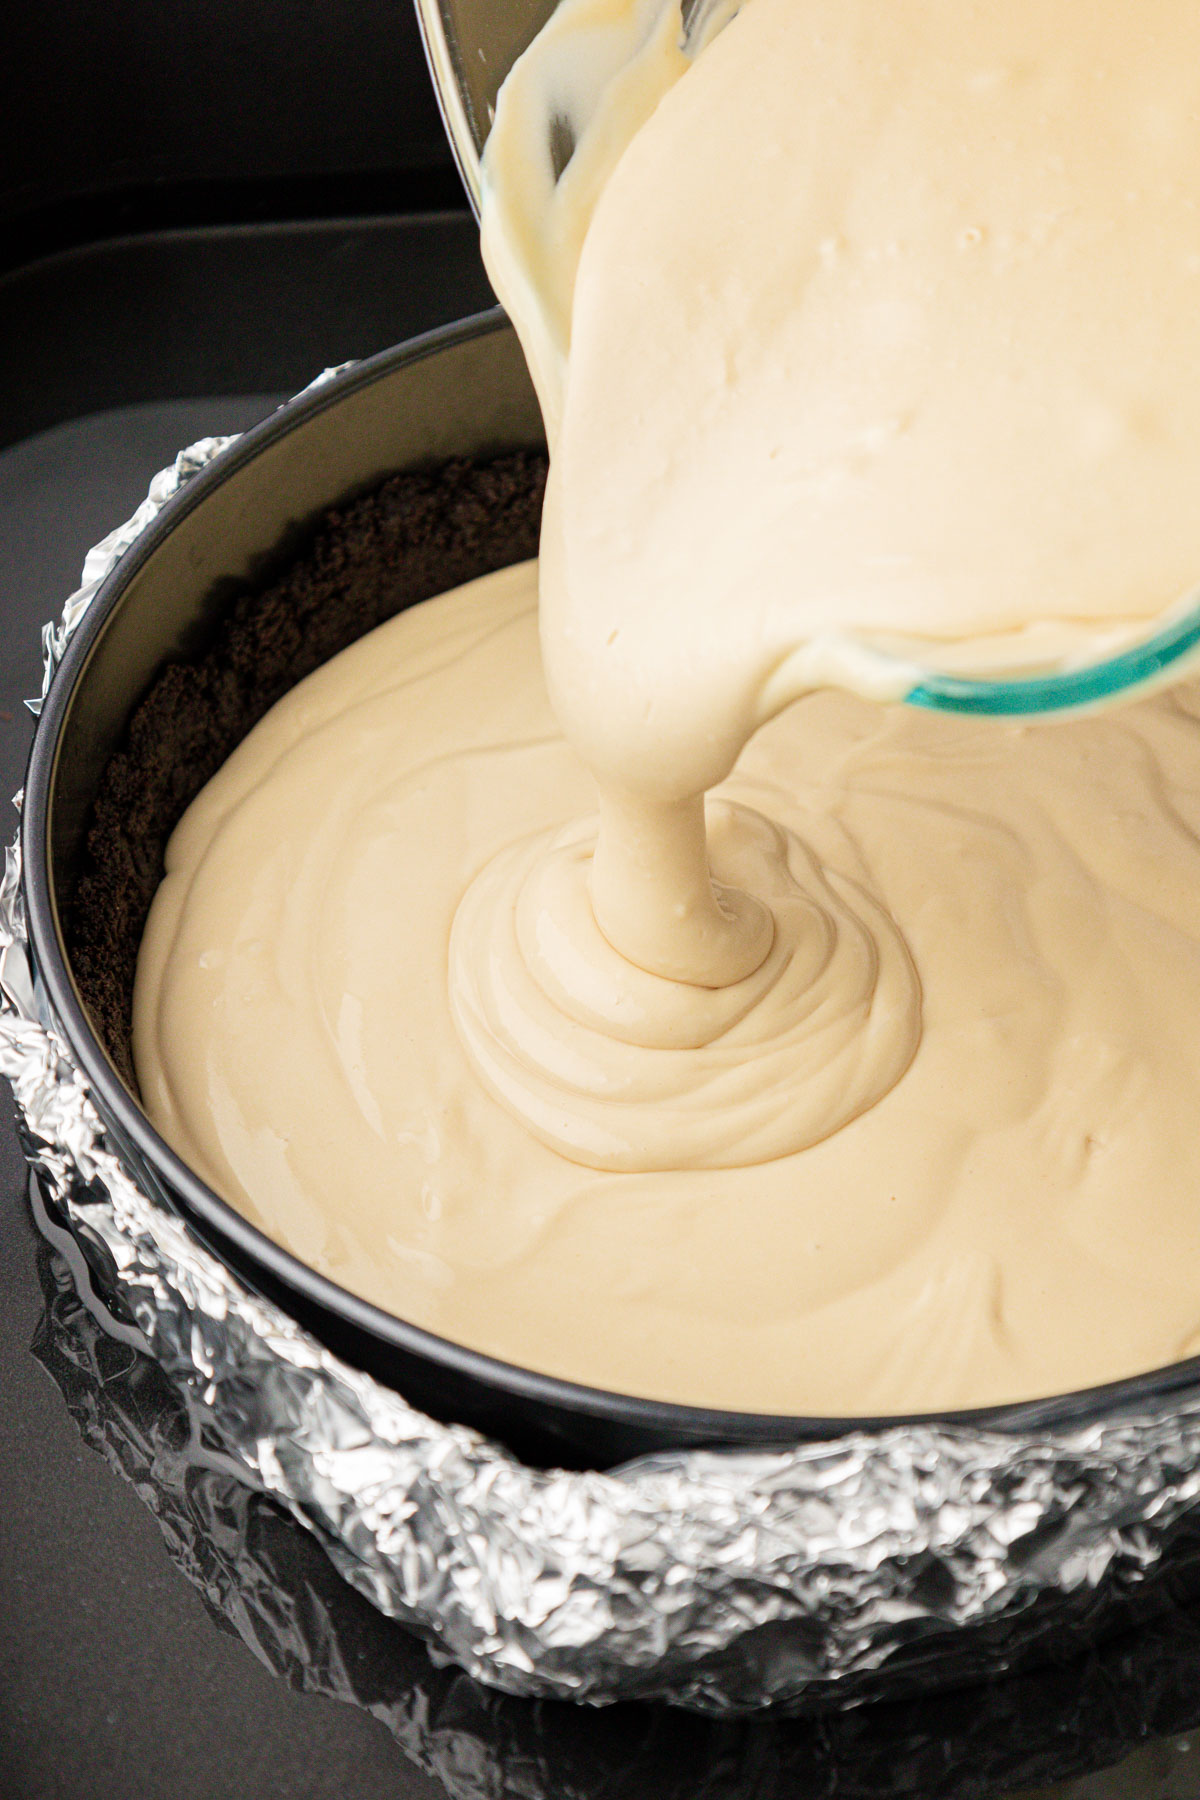 Coffee cheesecake filling being poured into a springform pan.